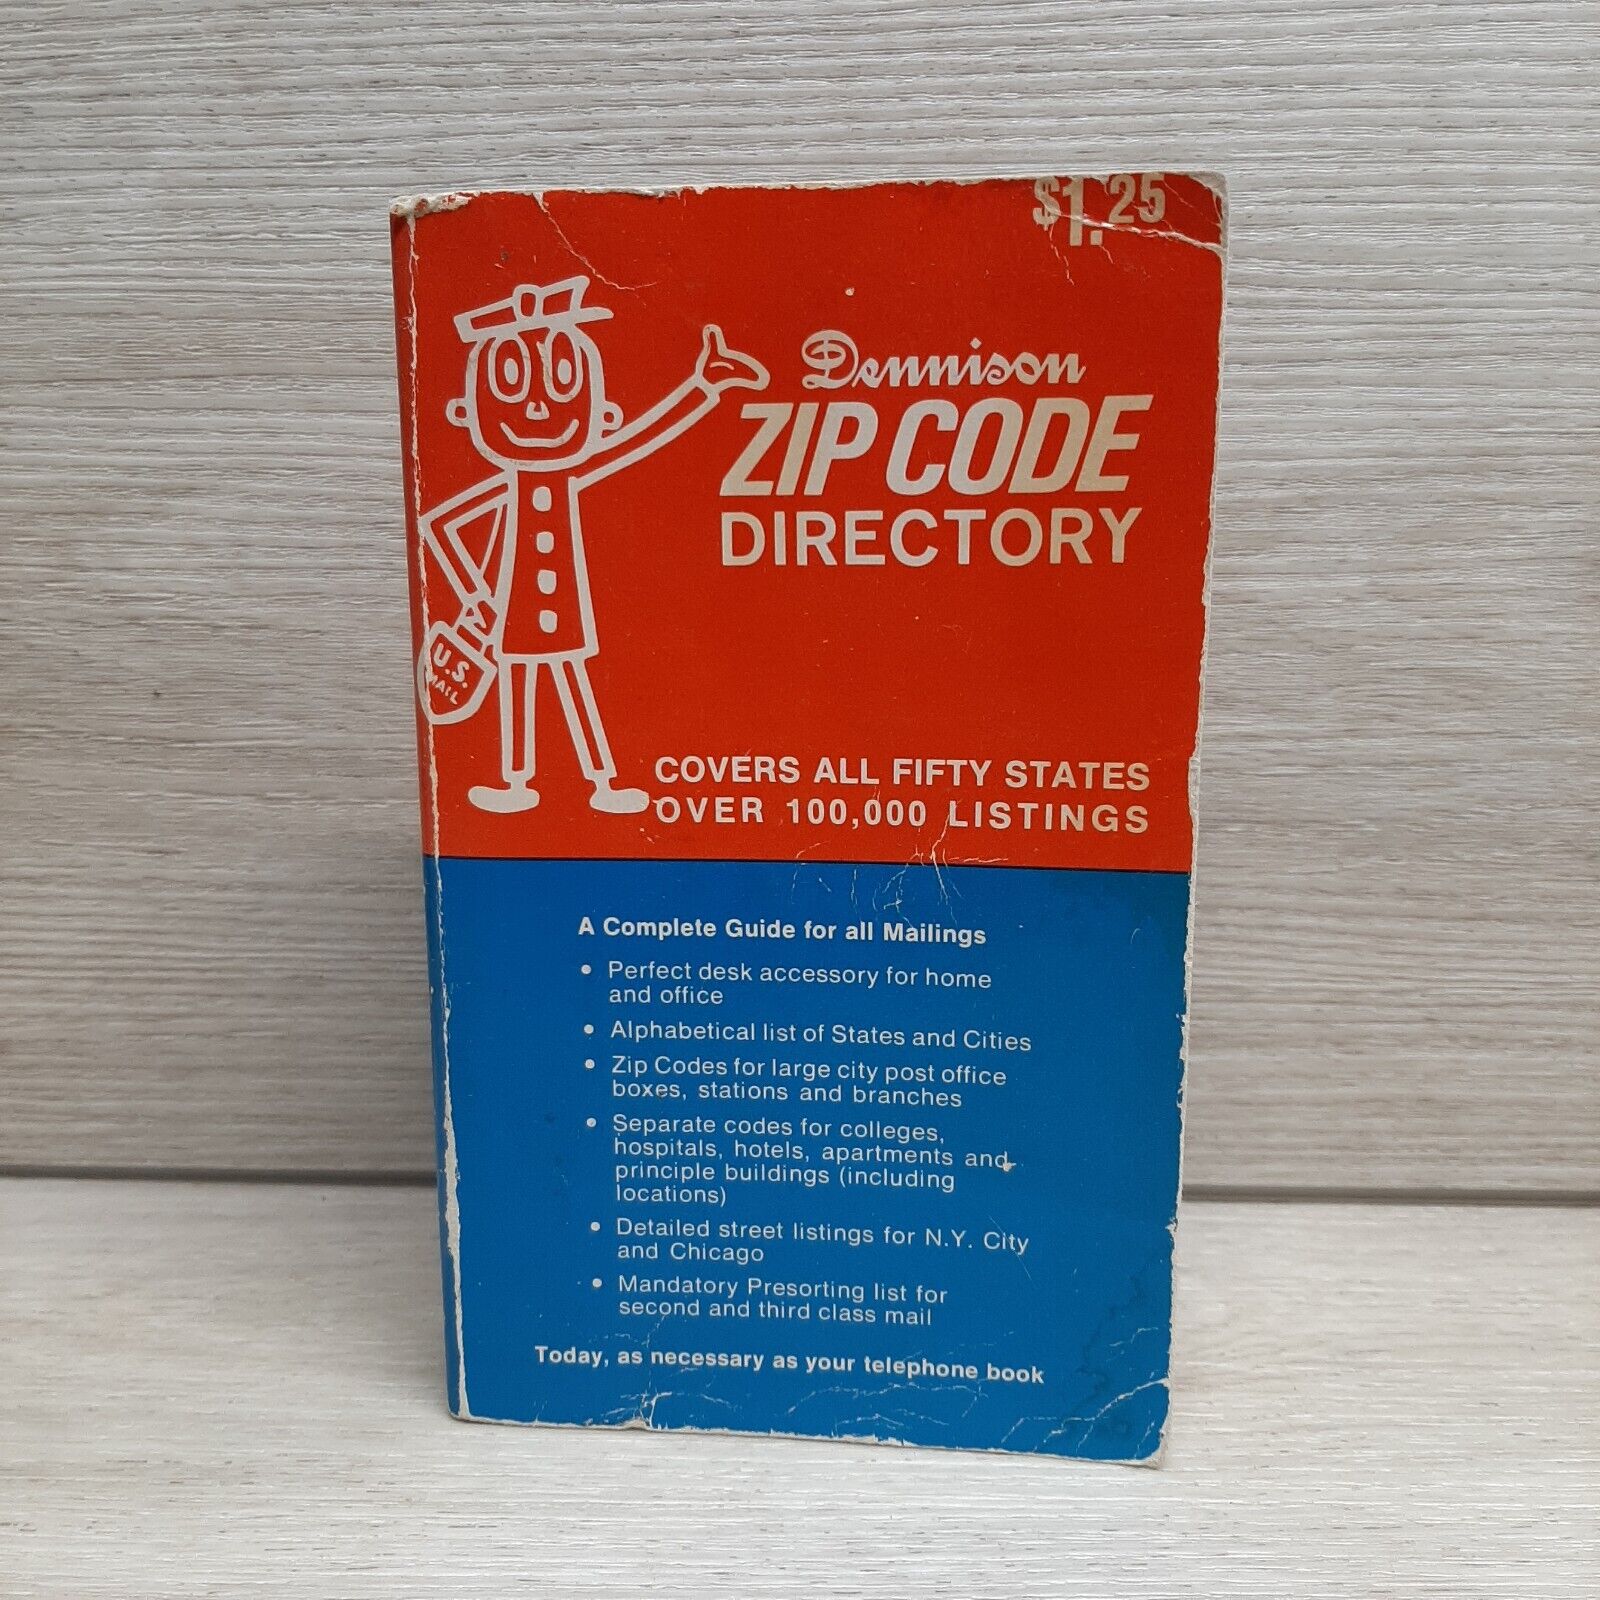 Dennison Zip Code Directory PB Covers All 50 States Over 100,000 Listings 